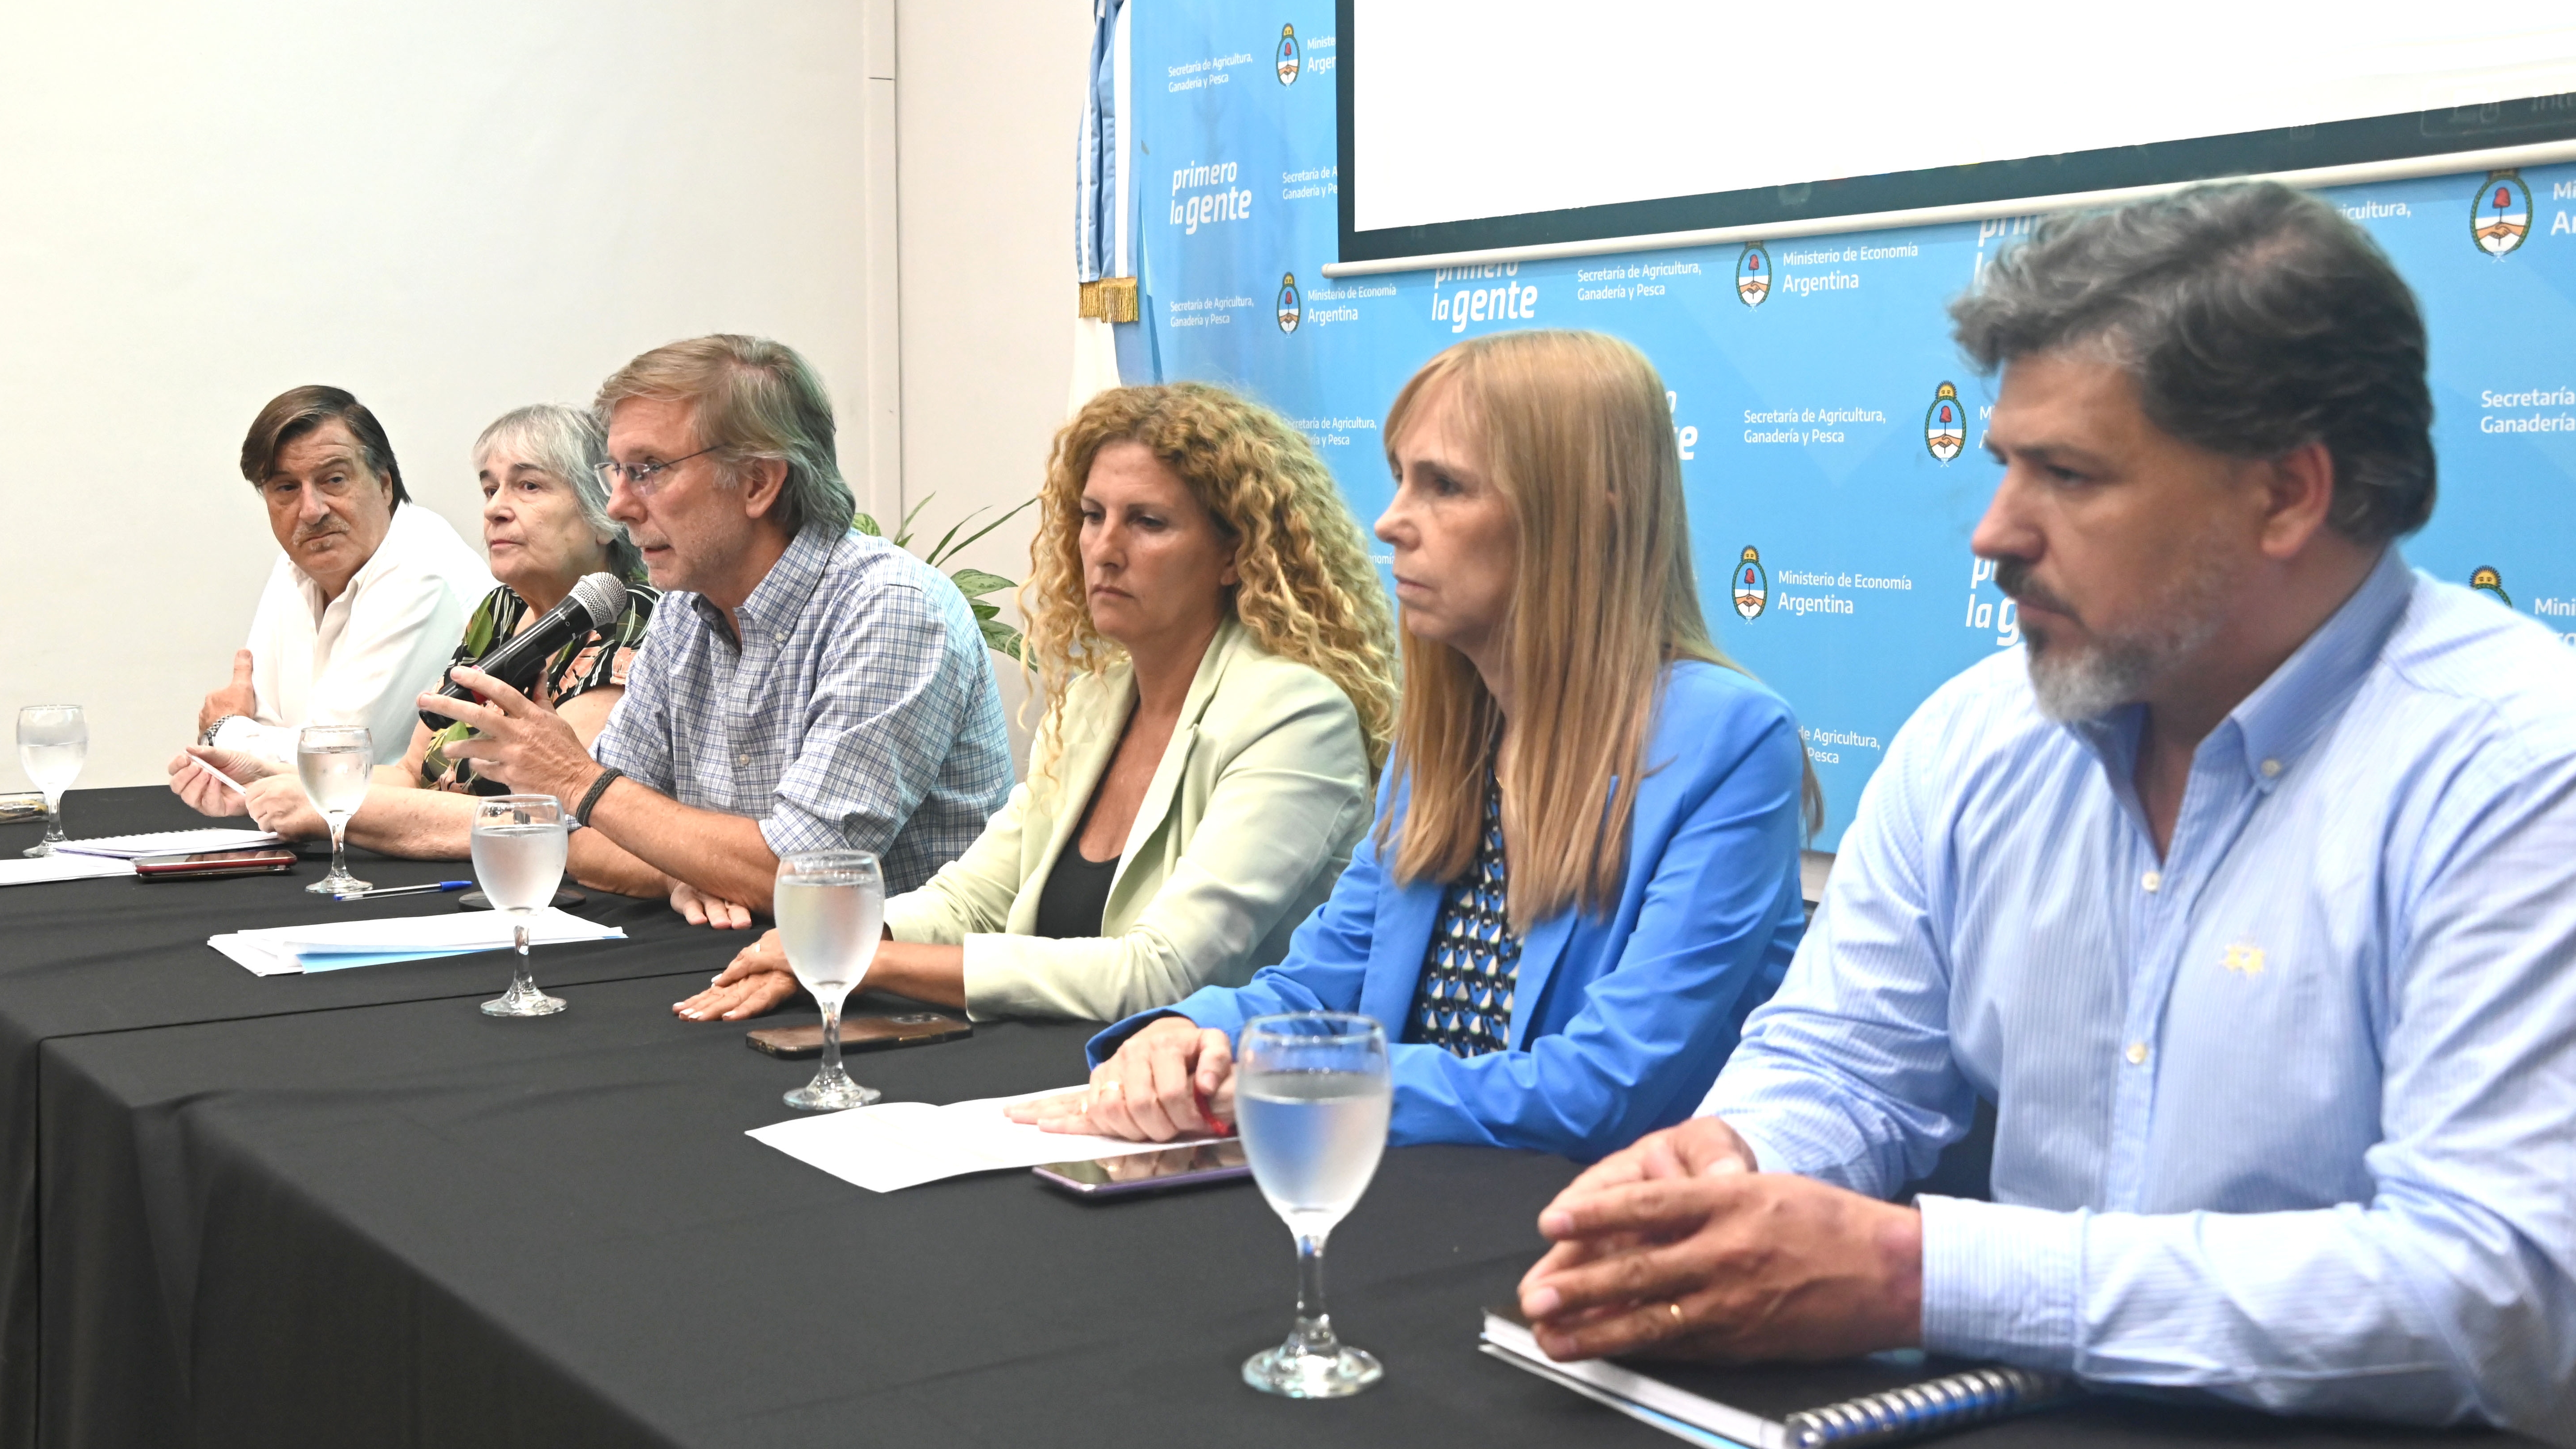 Officials of Agriculture, Senasa, and the Ministries of Health and Safety, at the time of announcing last week the first case of avian flu in Argentina